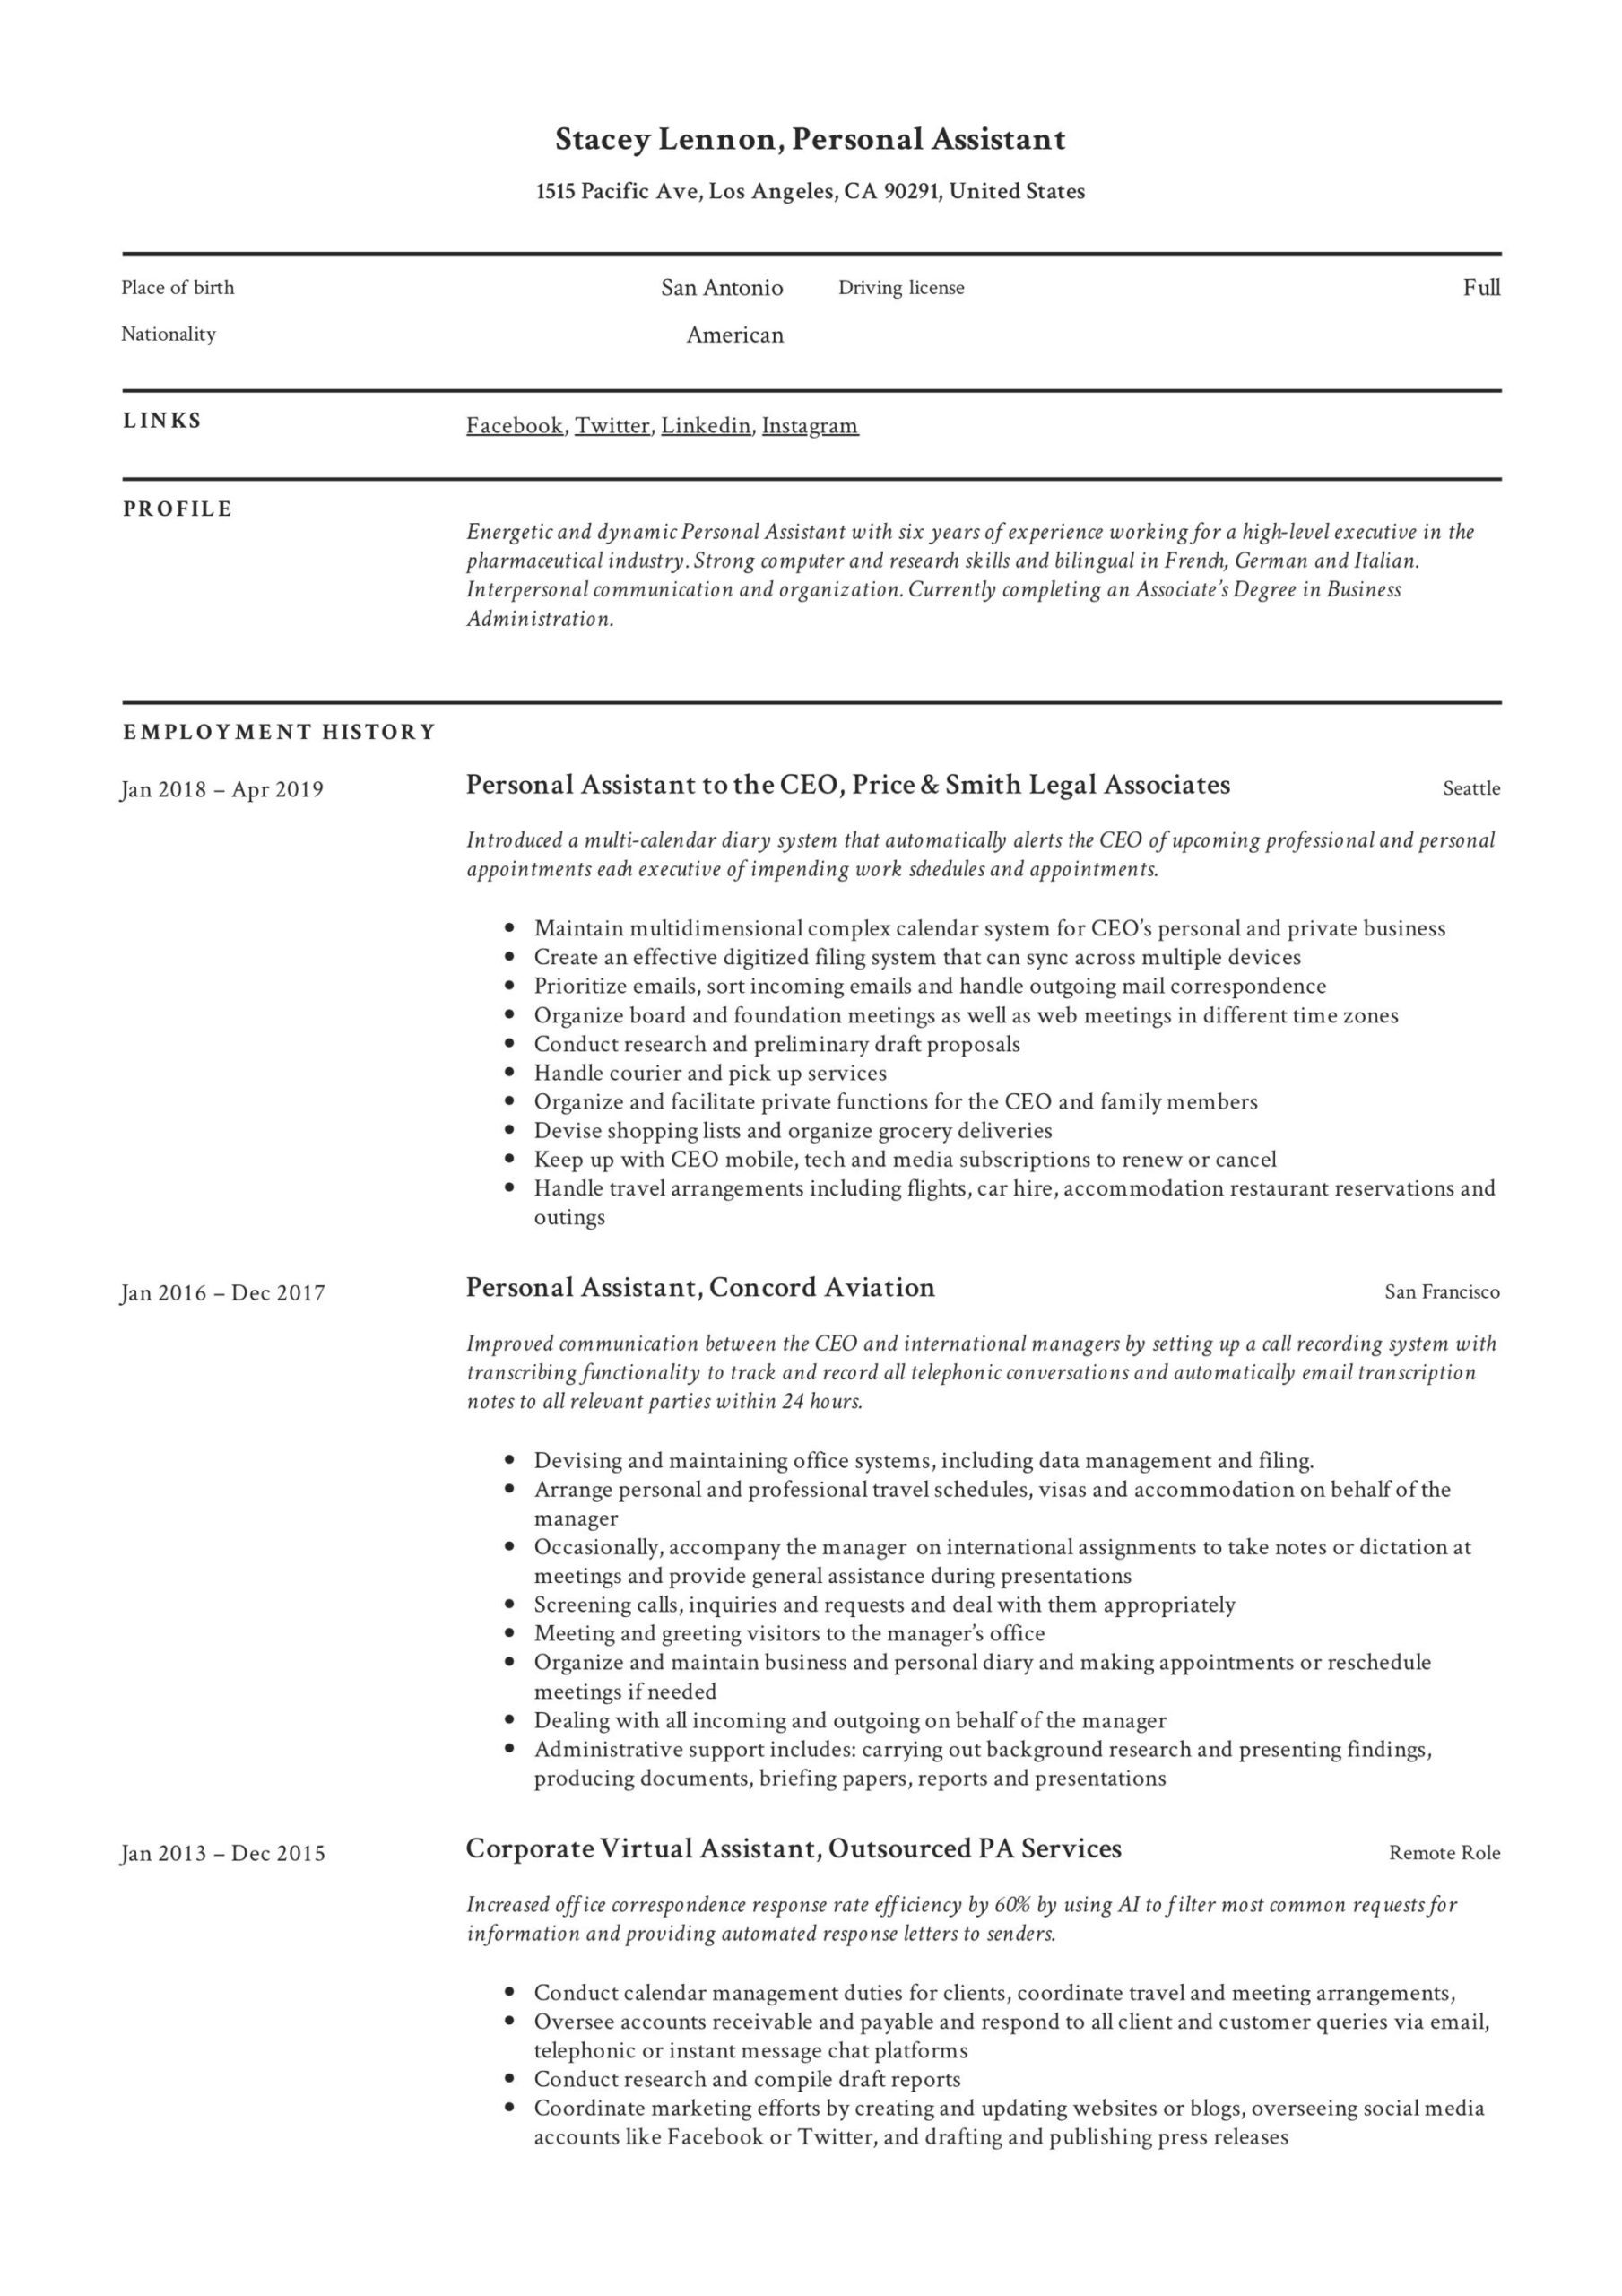 Resume Samples Of A Personal assistant Personal assistant Resume & Writing Guide  12 Templates Pdf ’20